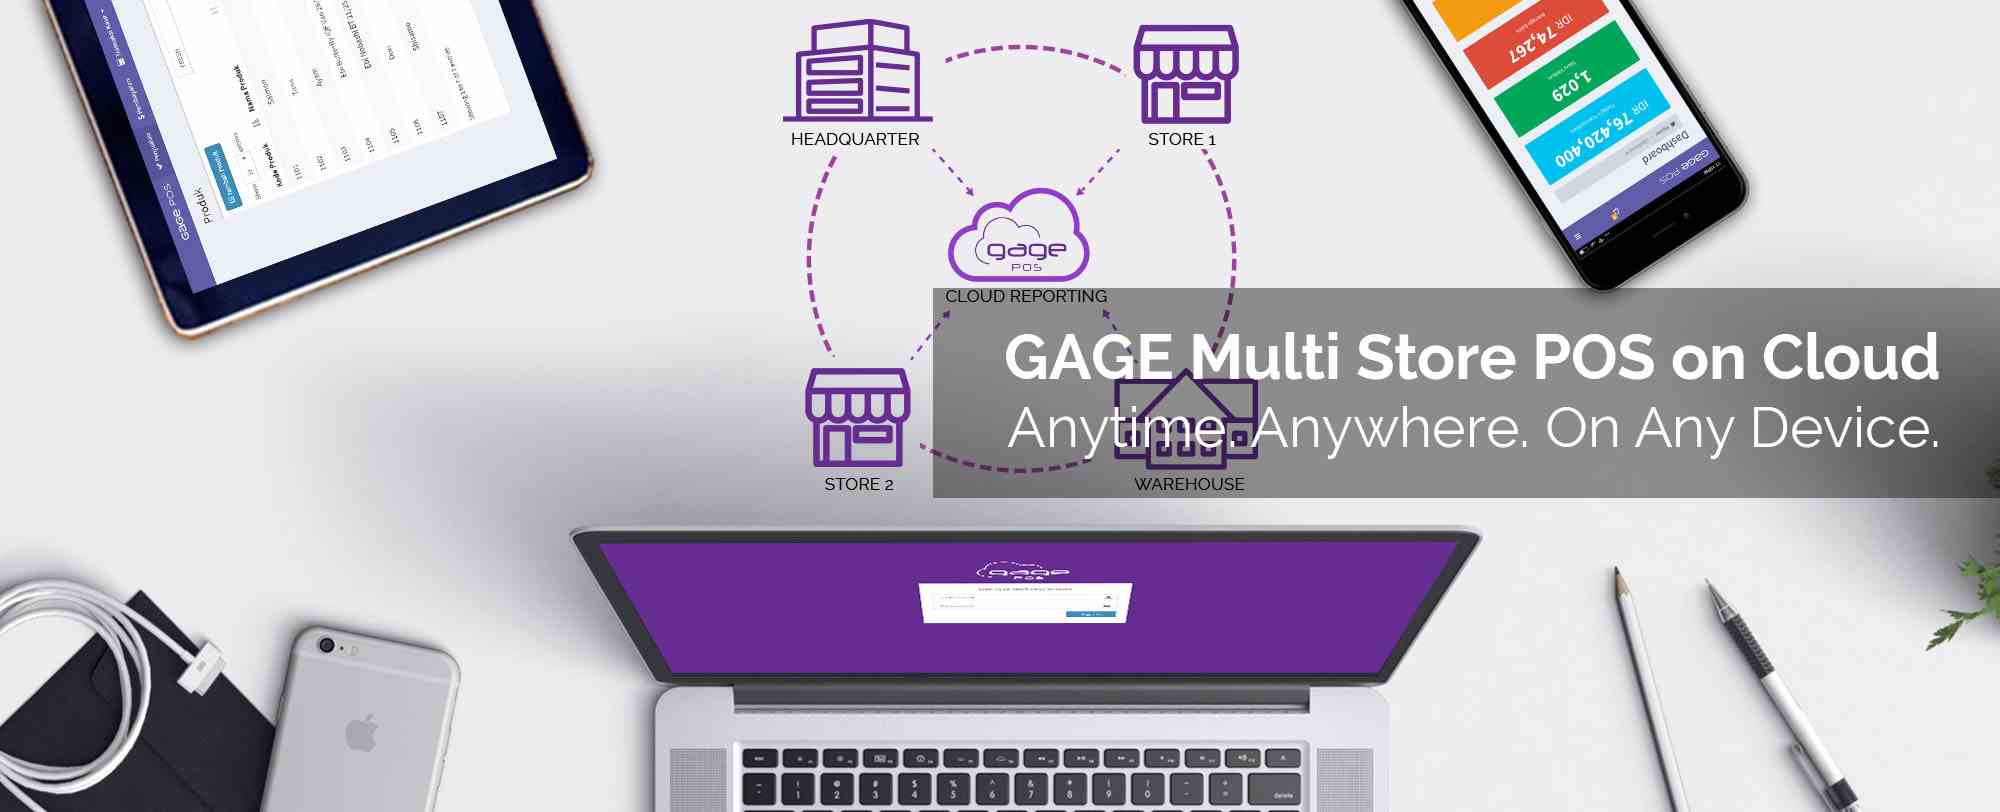 GAGE POS Multi Store POS on Cloud - Anytime, Anywhere, on any device.